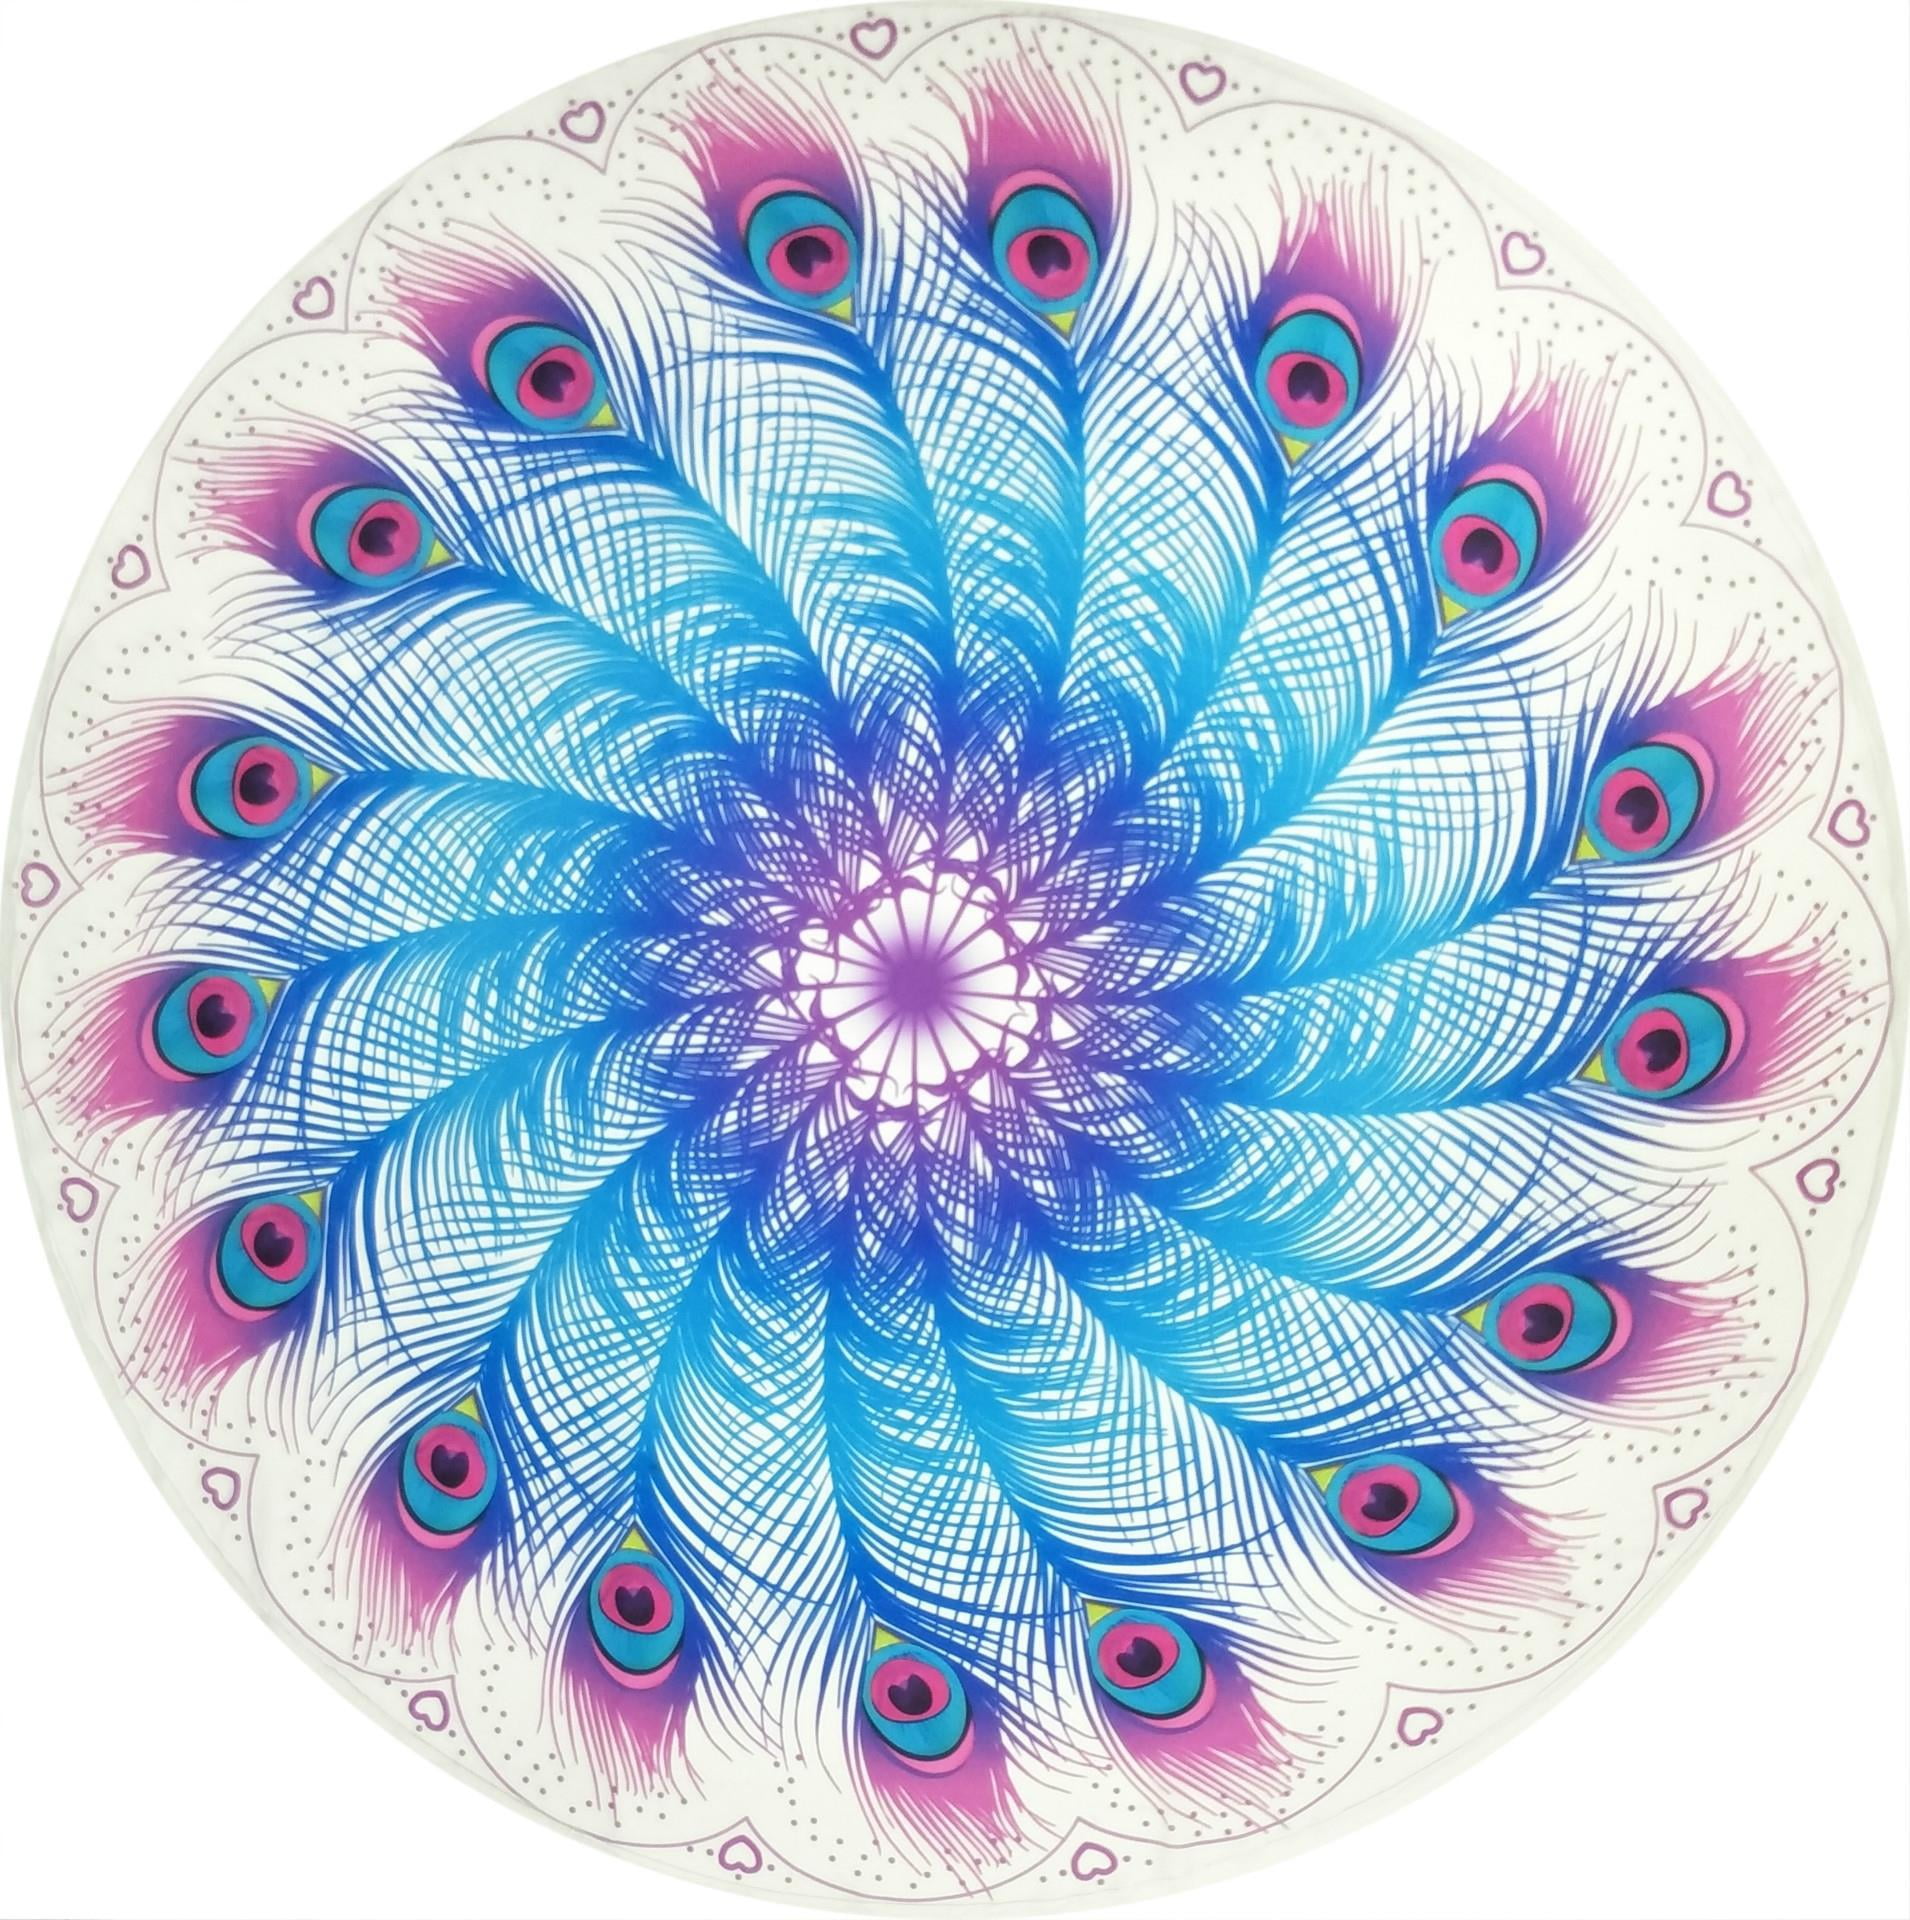 Details about   Mandala Beach Throw Towel Yoga Mat Round Table Cover Tapestry 